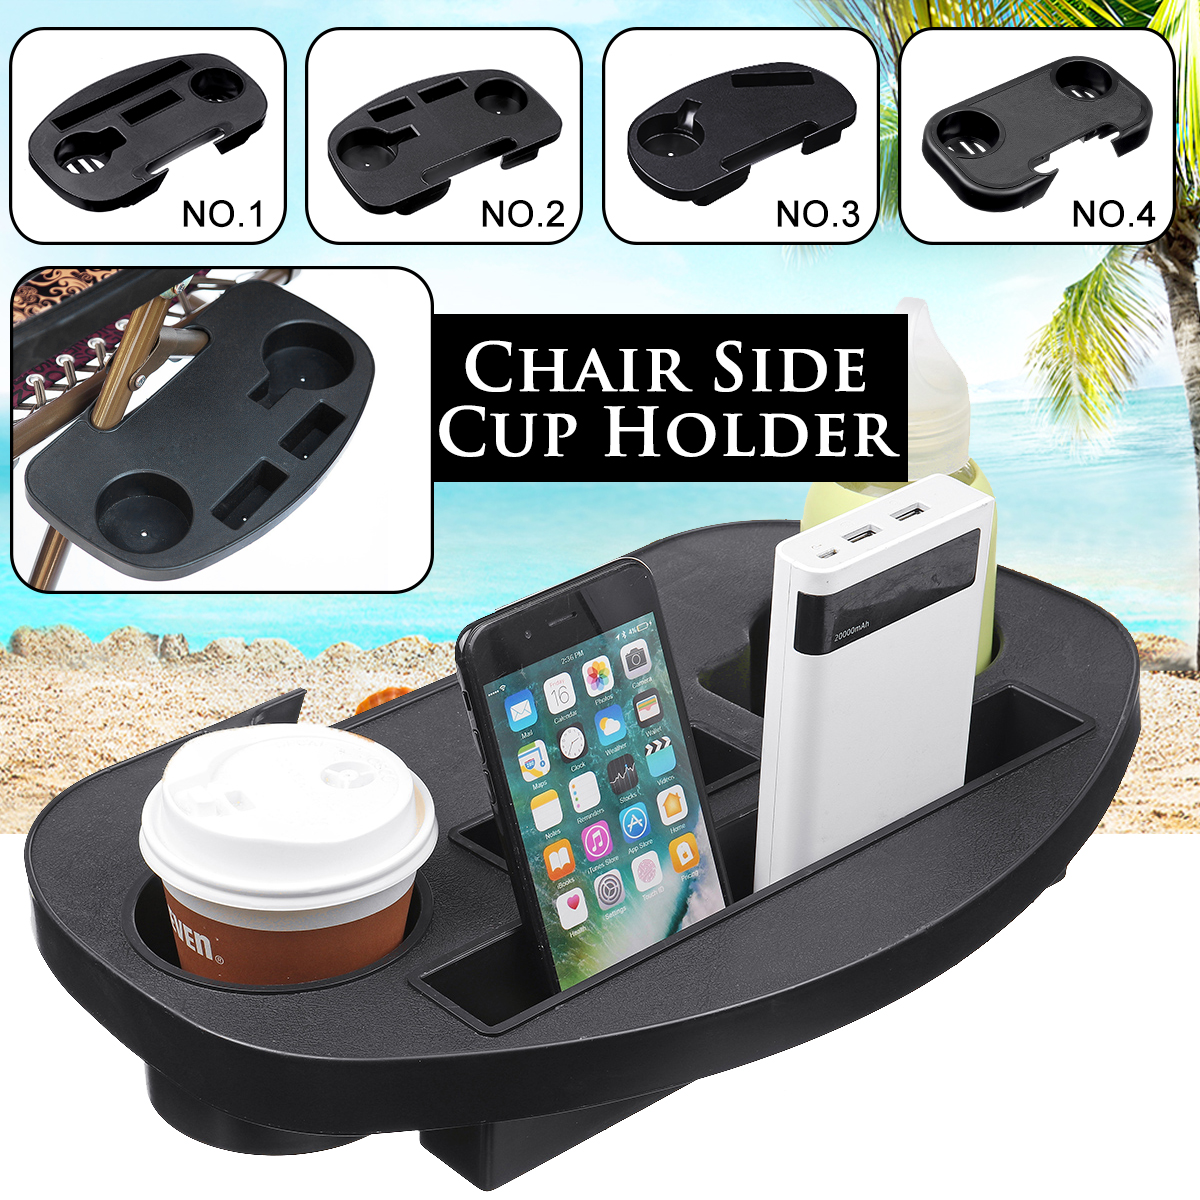 Folding-Chair-Table-Side-Tray-Multi-functional-Drink-Cup-Water-Bottle-Holder-Phone-Rack-1694964-4